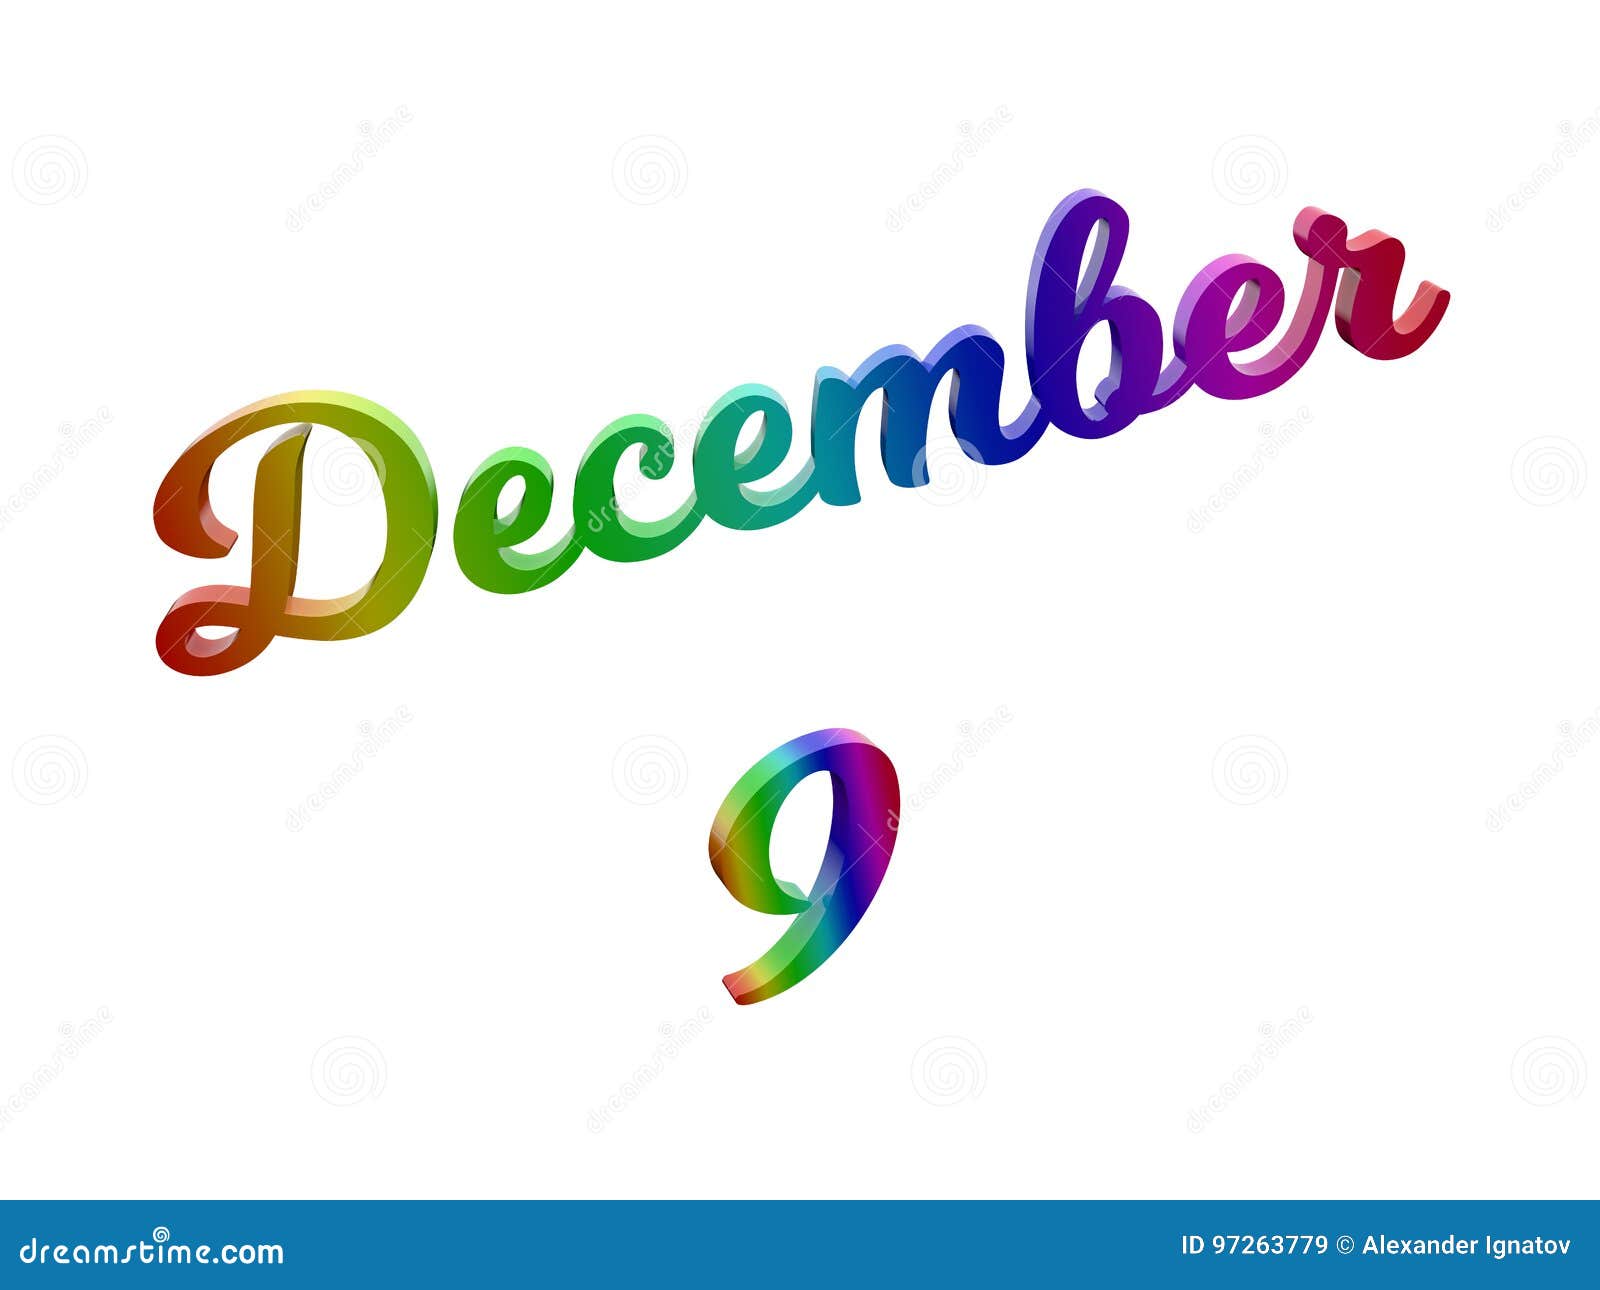 December 9 Date of Month Calendar, Calligraphic 3D Rendered Text